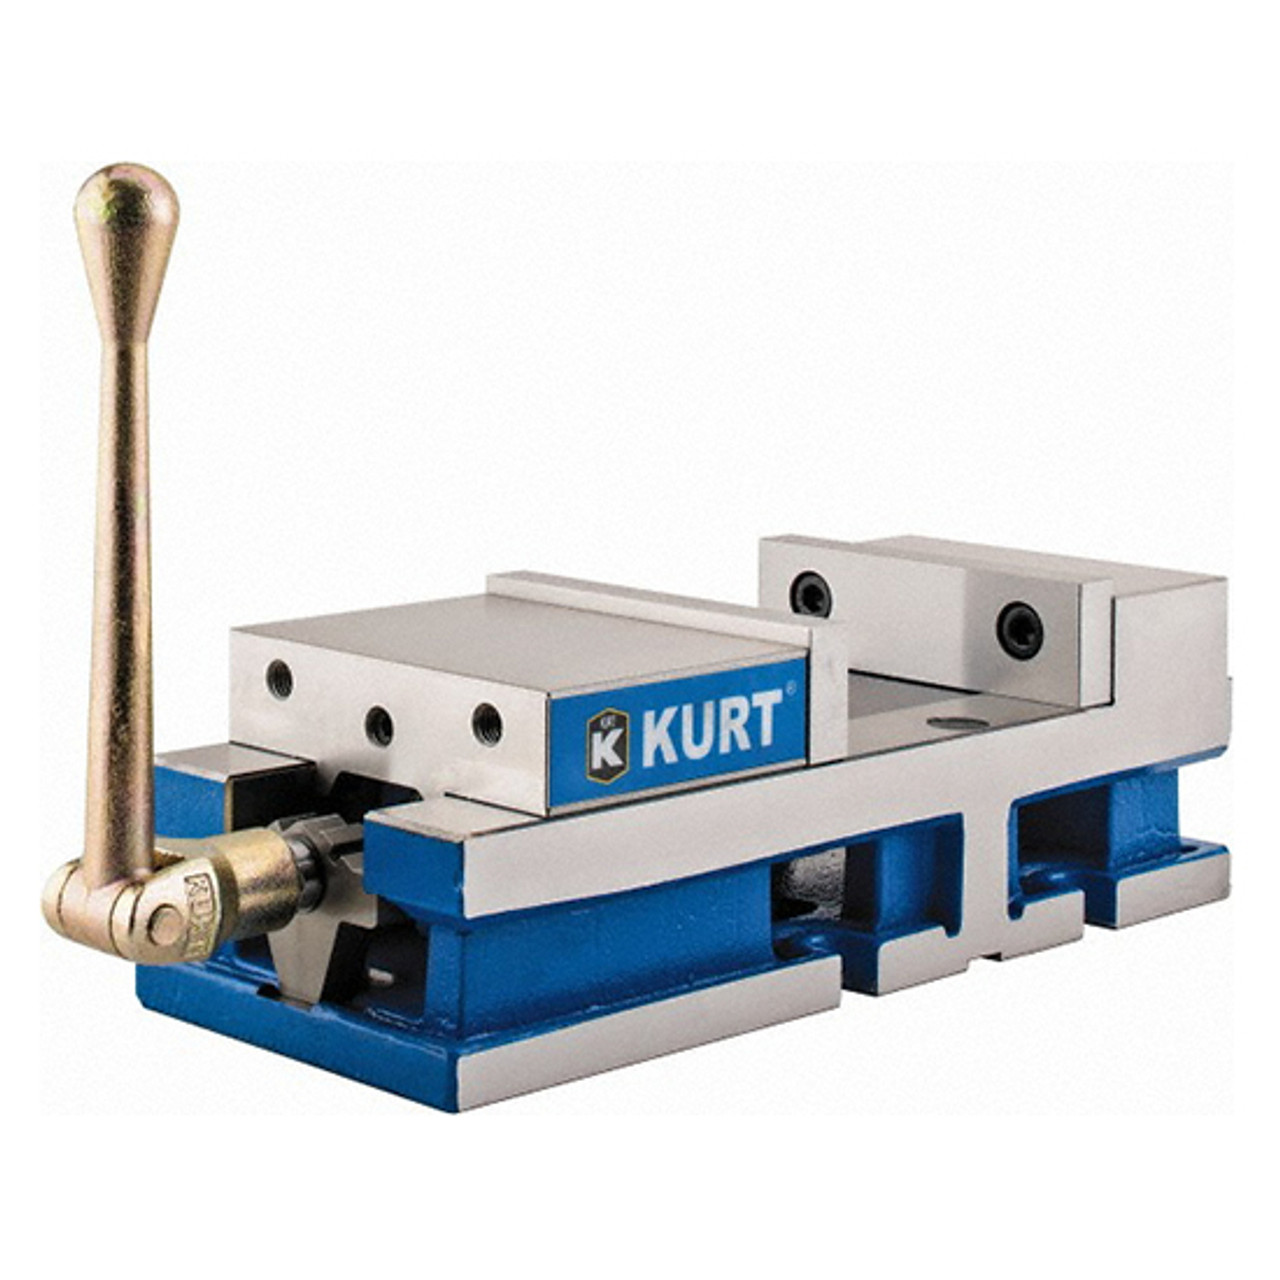 Kurt 3600V 6" Jaw 6" Opening Manual Machine Vise All Industrial Tool Supply